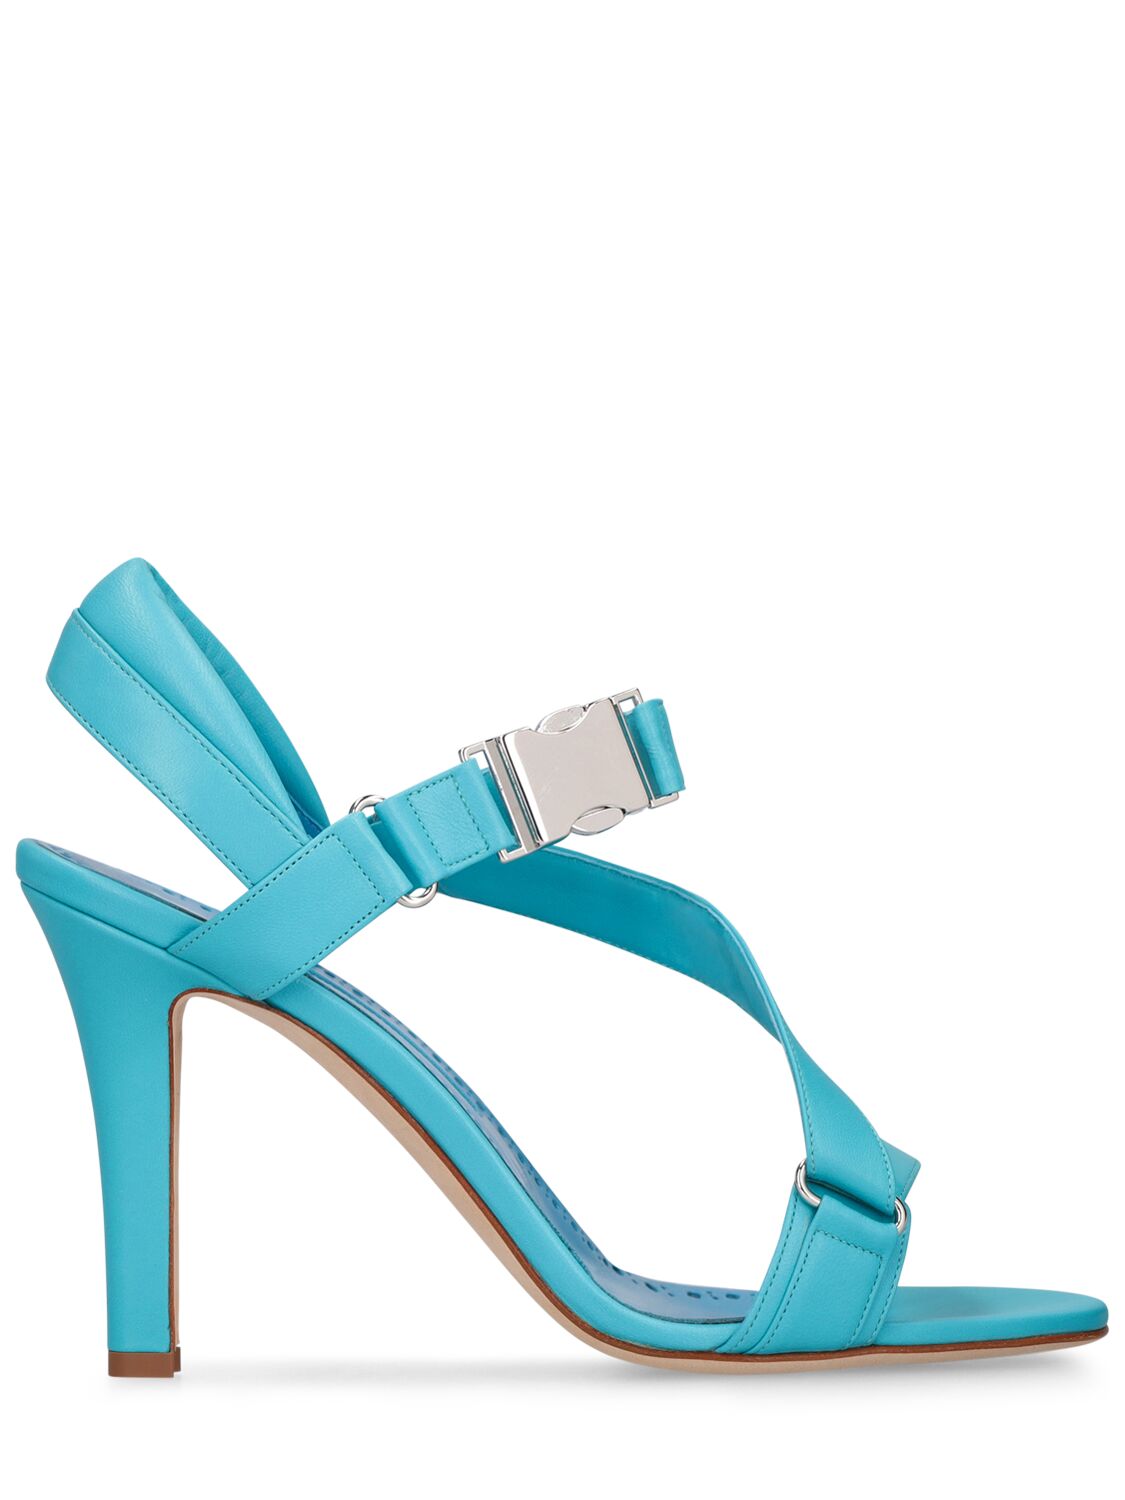 Manolo Blahnik 90mm Puxanhi Leather Sandals In Turquoise